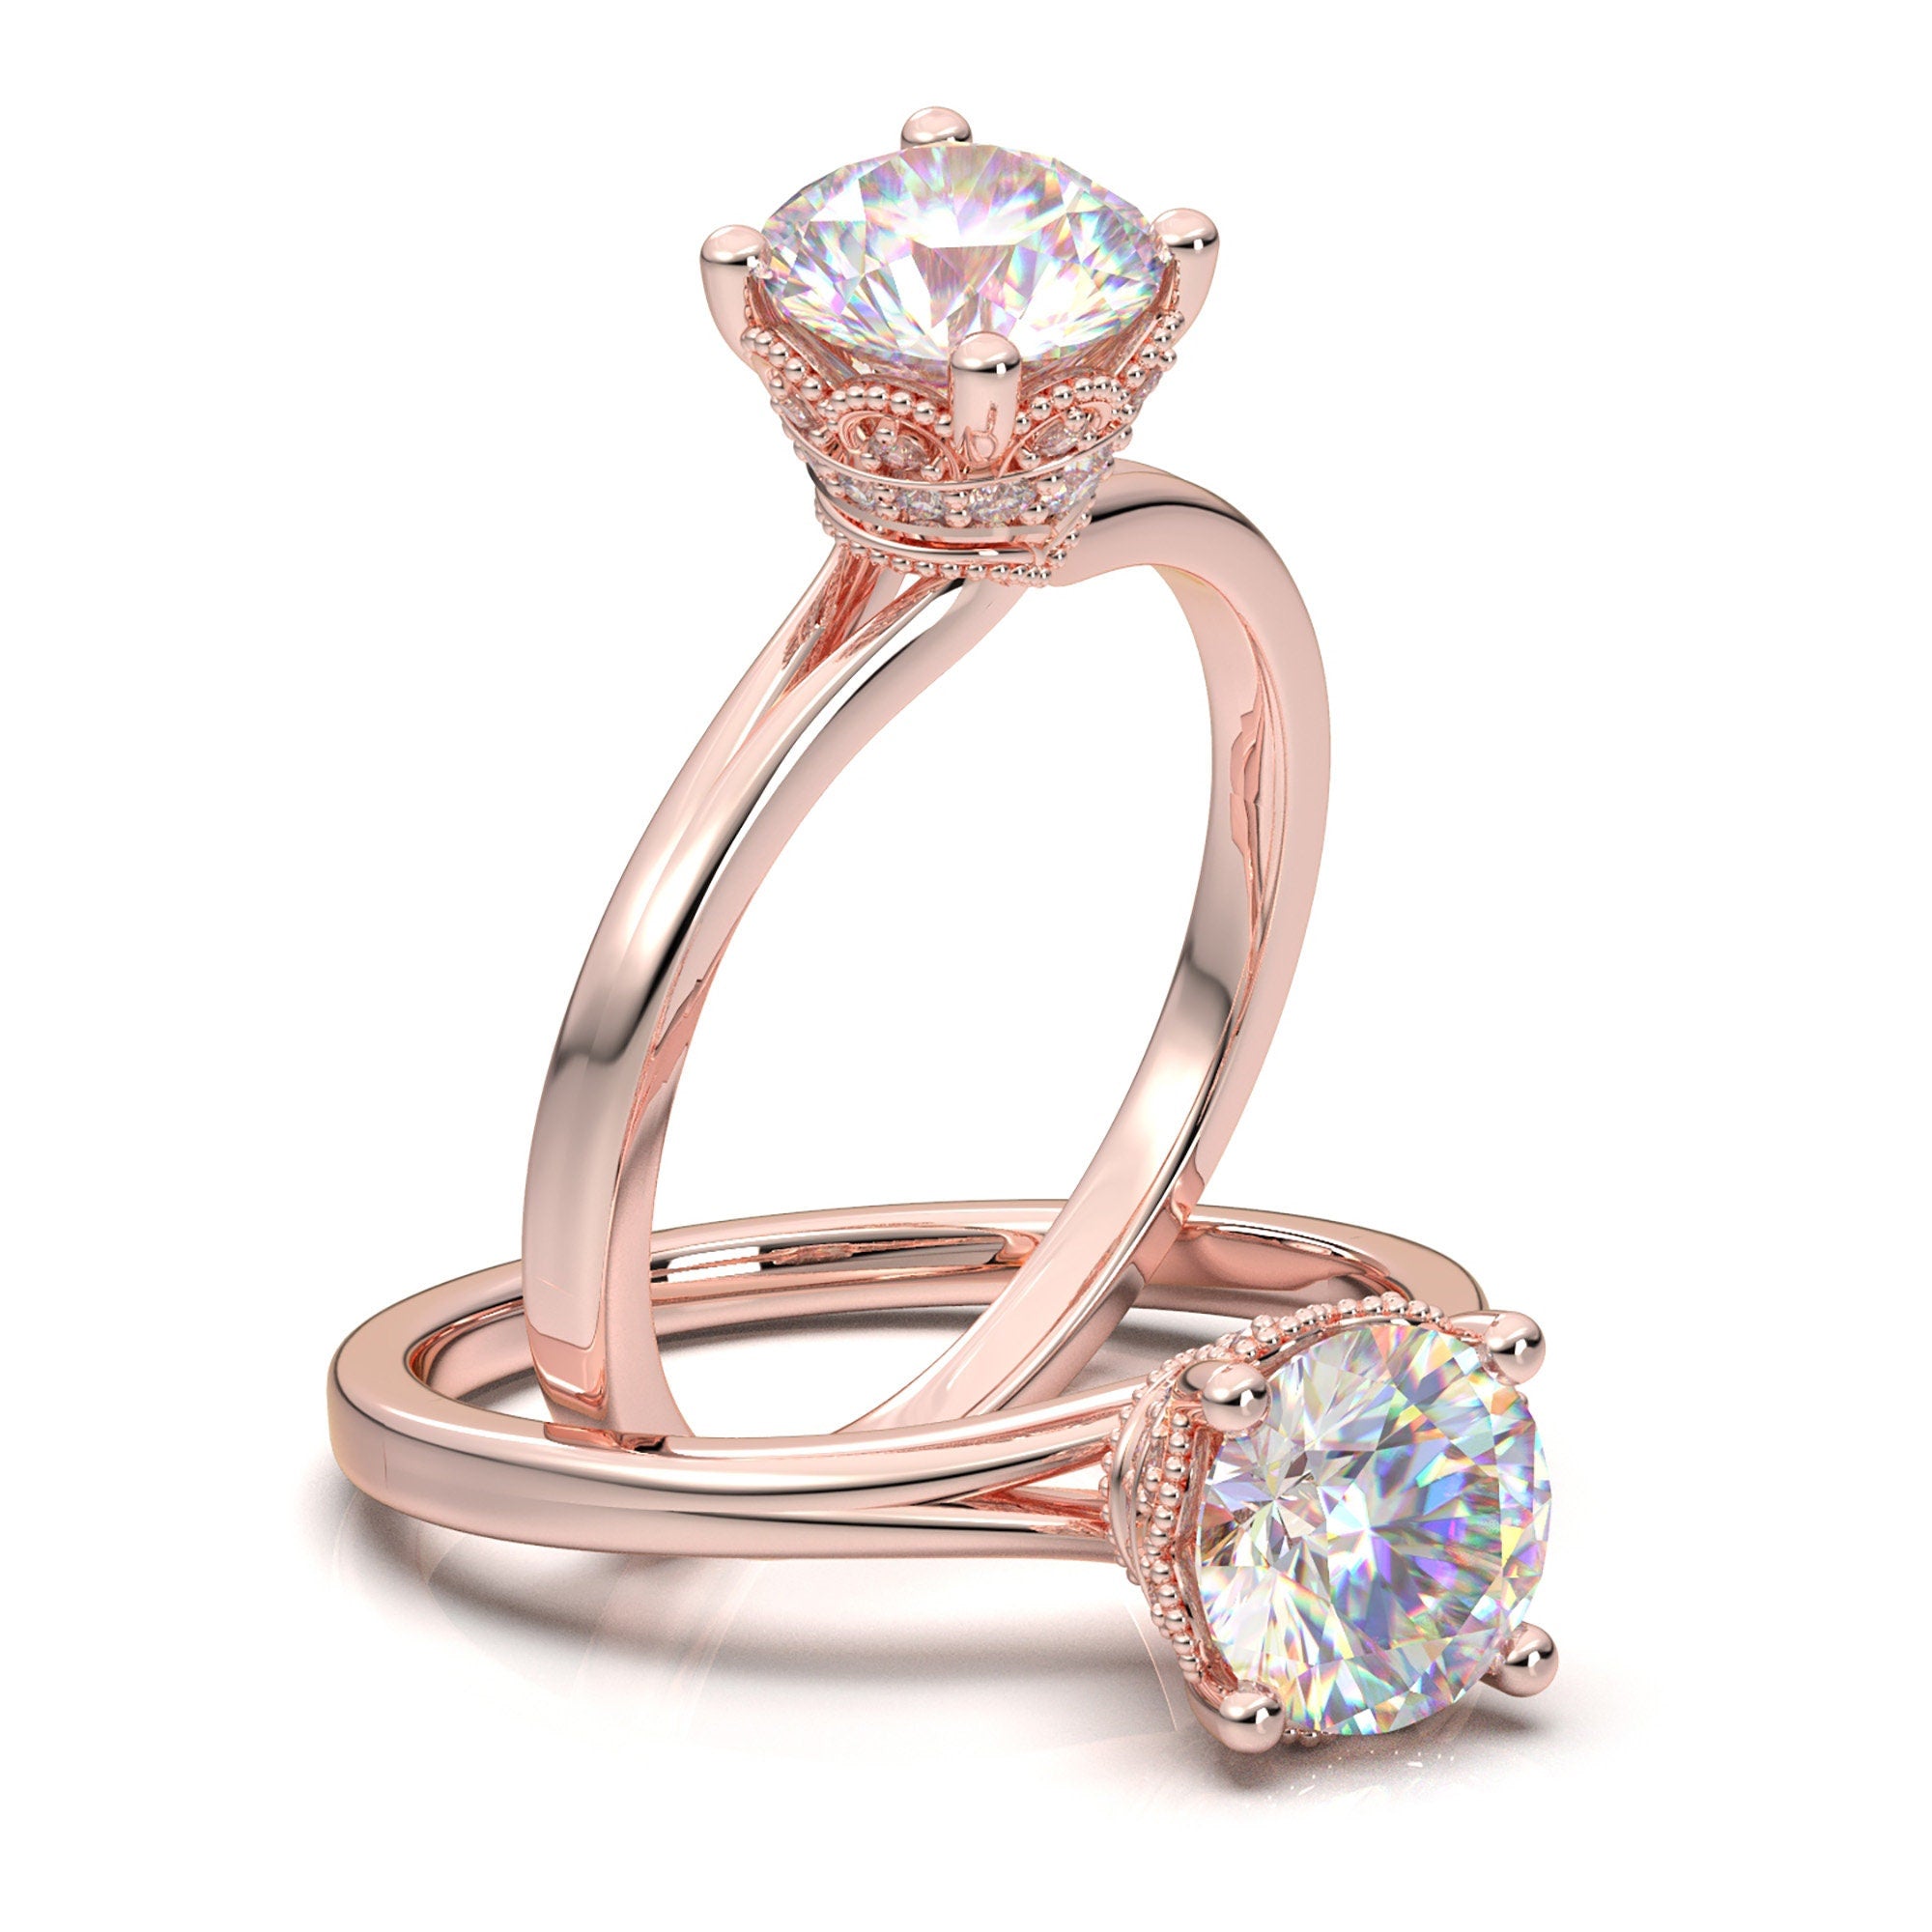 Unique Engagement Rings | 919-578-1038 | Alysha Whitfield Jewelry